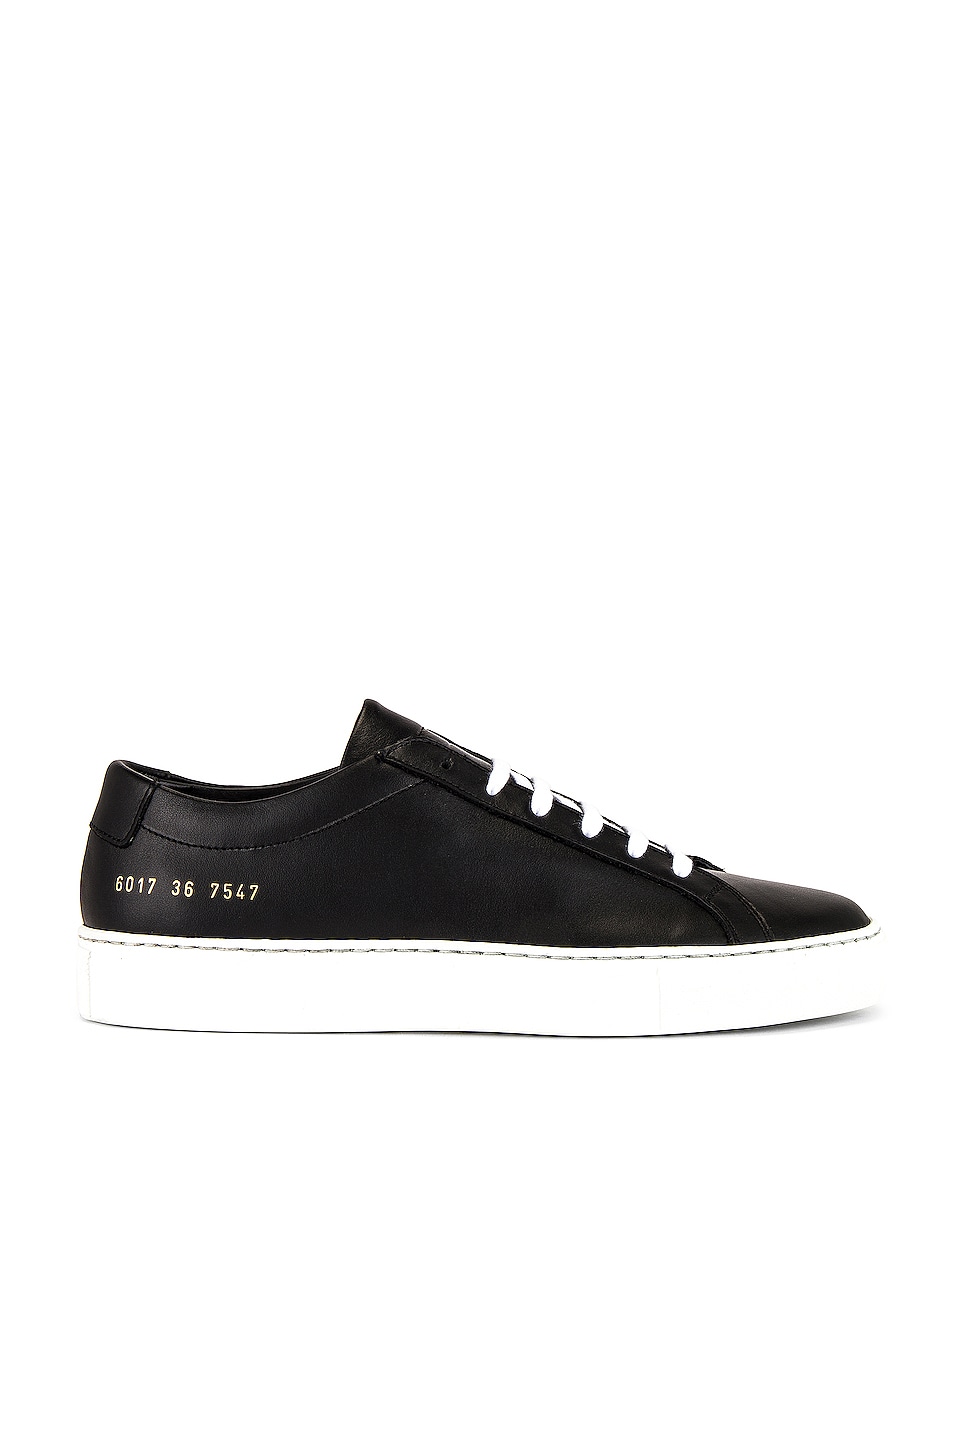 common projects black and white